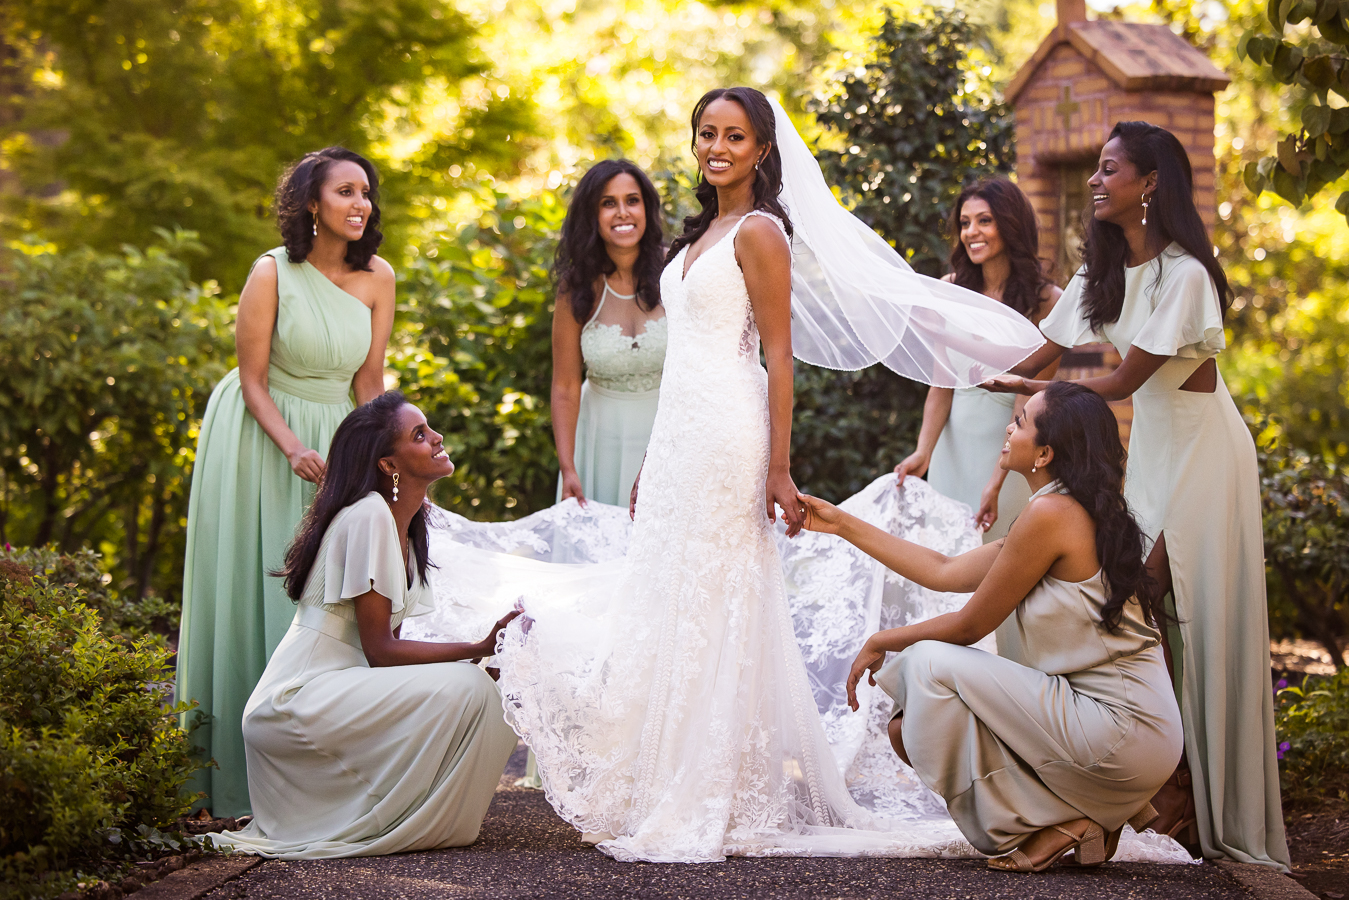 st Francis hall wedding photographer, Lisa Rhinehart, captures this stunning image of this Ethiopian bride with her bridesmaids as they all hold a part of the wedding gown as their dressed in their various shades of sage green for this multicultural wedding in dc